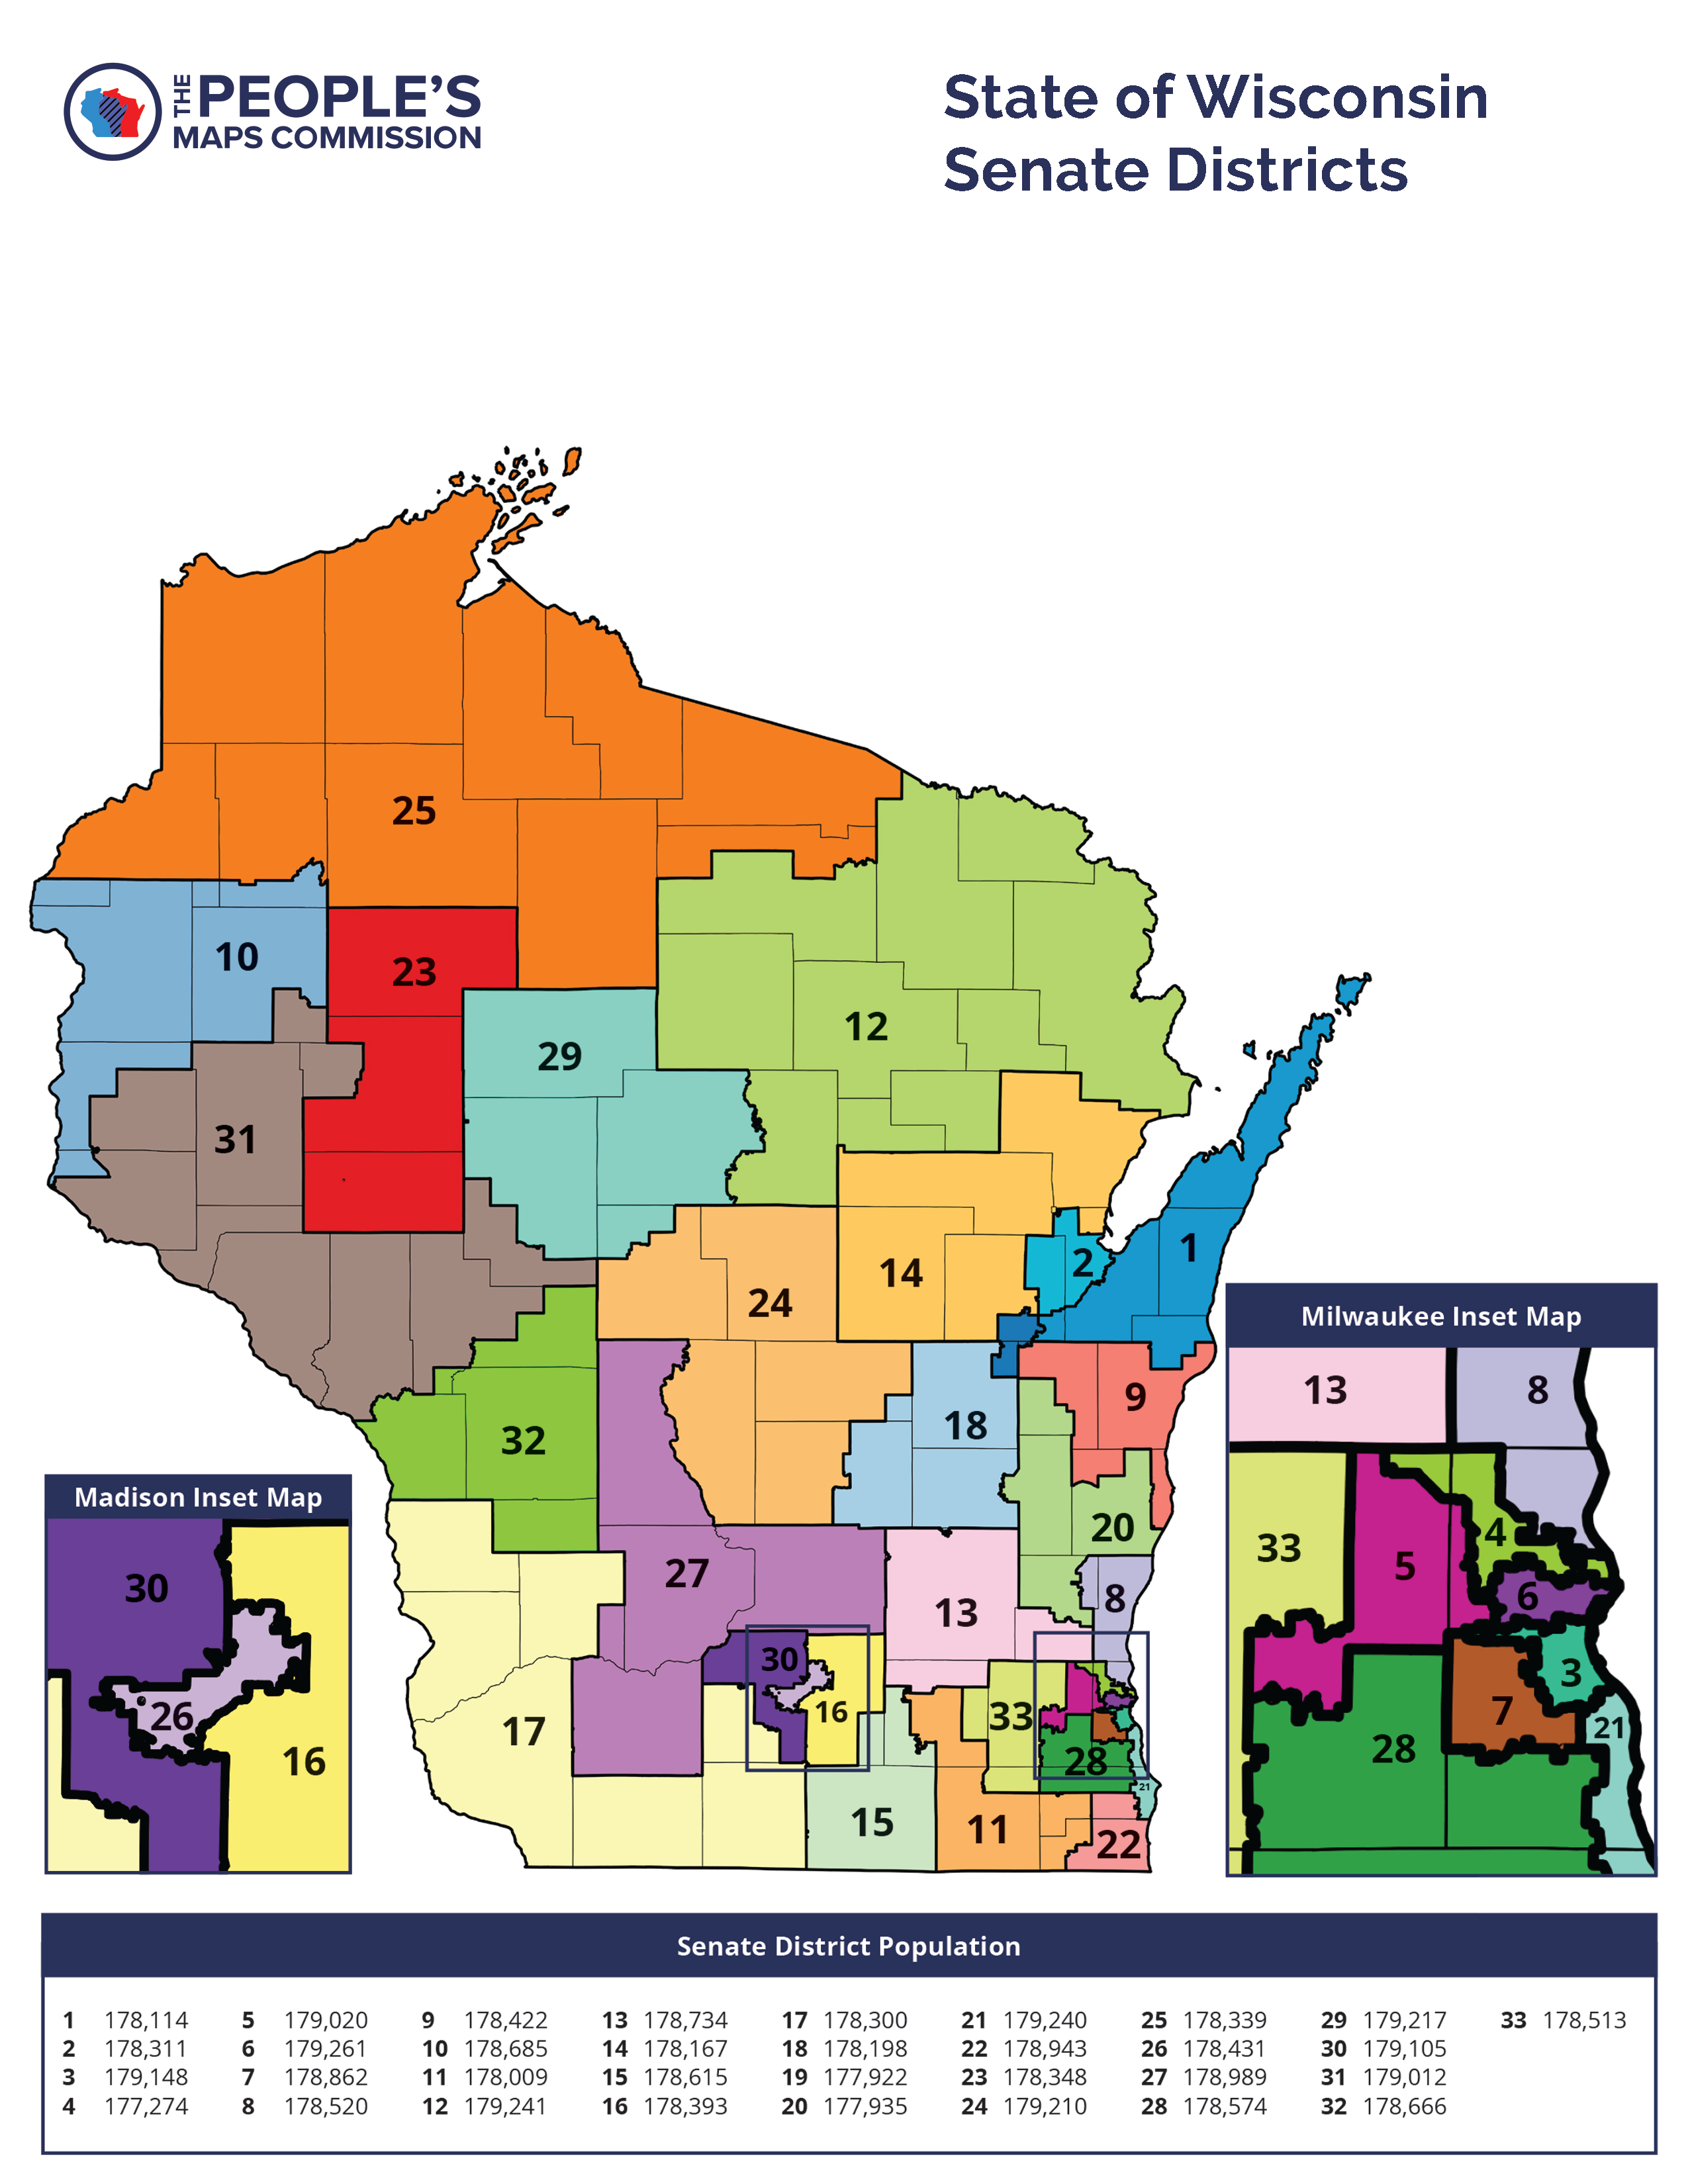 People’s Maps Commission releases redistricting proposals